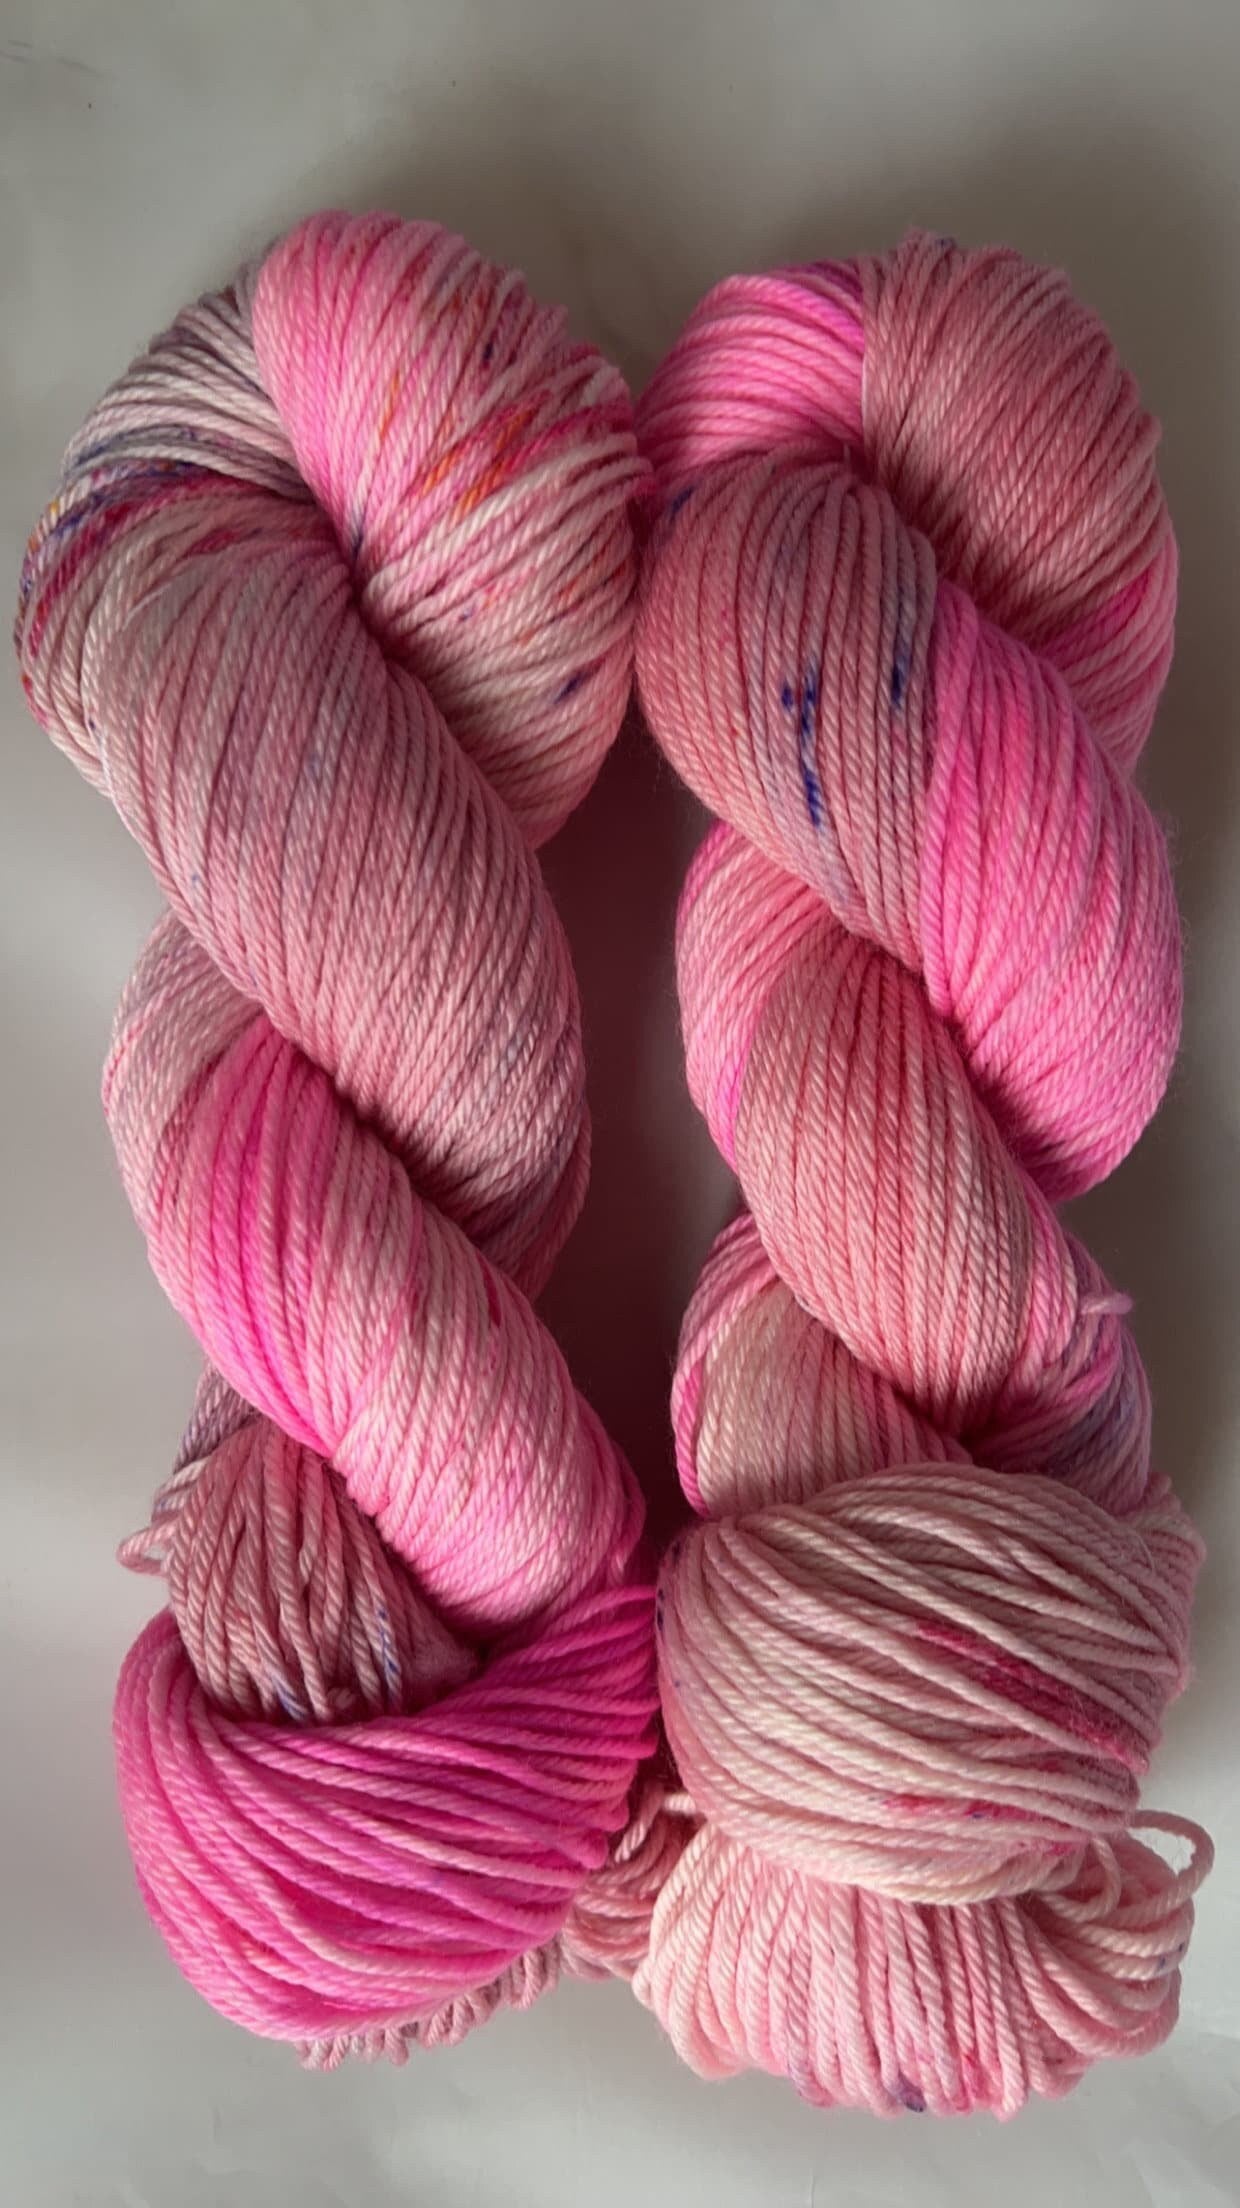 Hand-Dyed Merino Wool Yarn - Soft and Durable Yarn for Knitting and Crocheting | Indie Dyed Merino Wool | Worsted | Cupcake Frosting